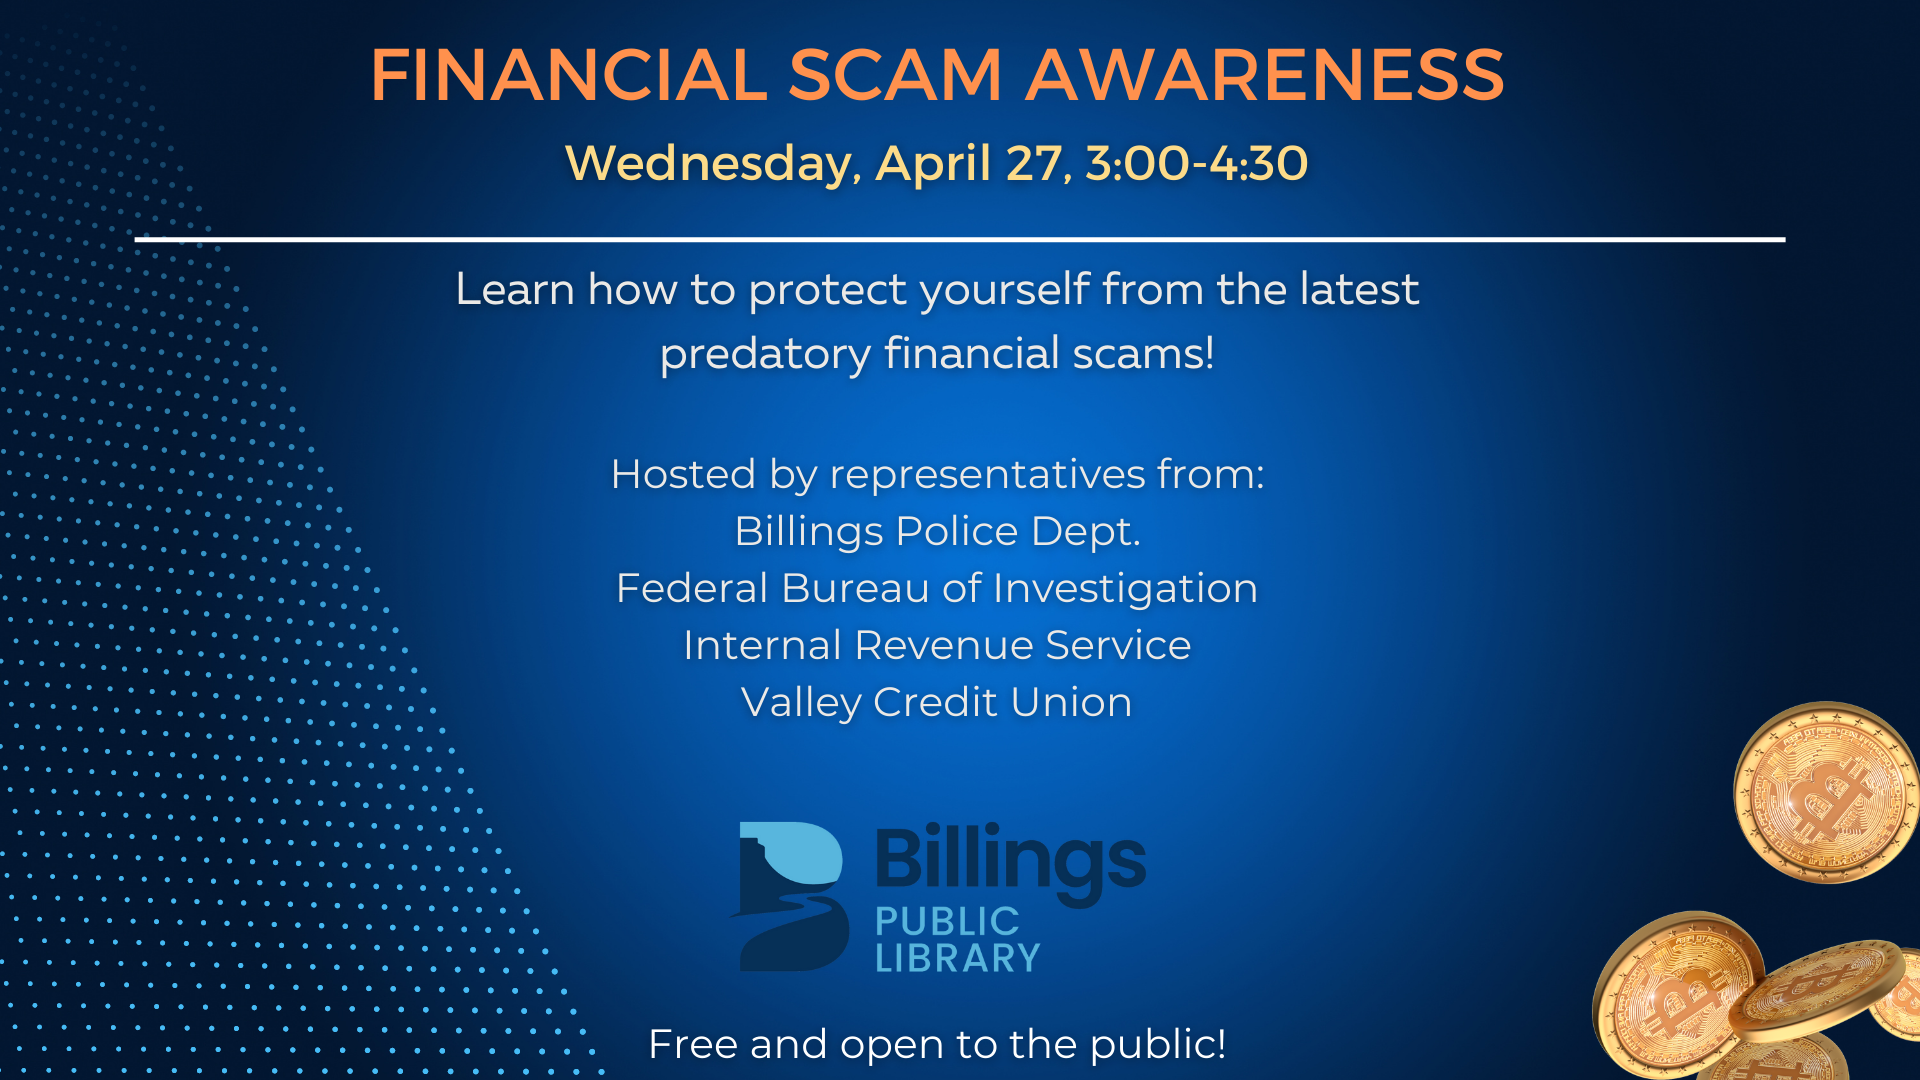 Join us and representatives from Valley Credit Union, Billings PD, FBI, and IRS to learn how to protect yourself from financial scams.